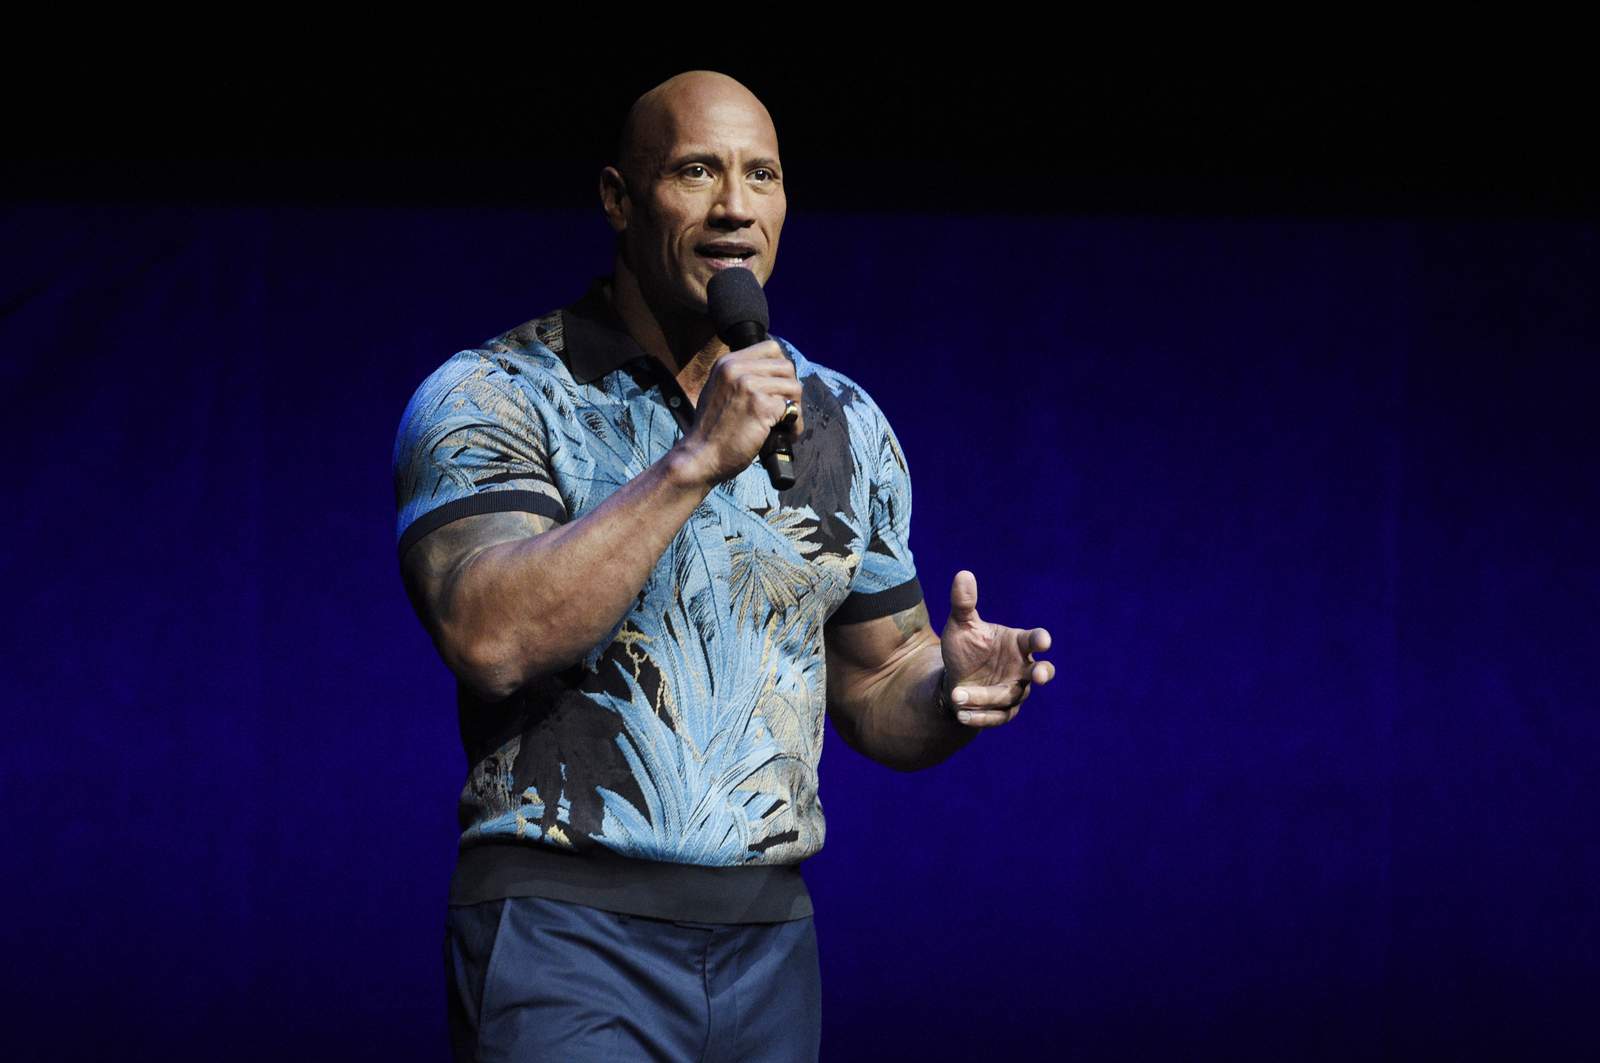 ‘The best choice to lead our country': Dwayne ‘The Rock’ Johnson endorses Joe Biden